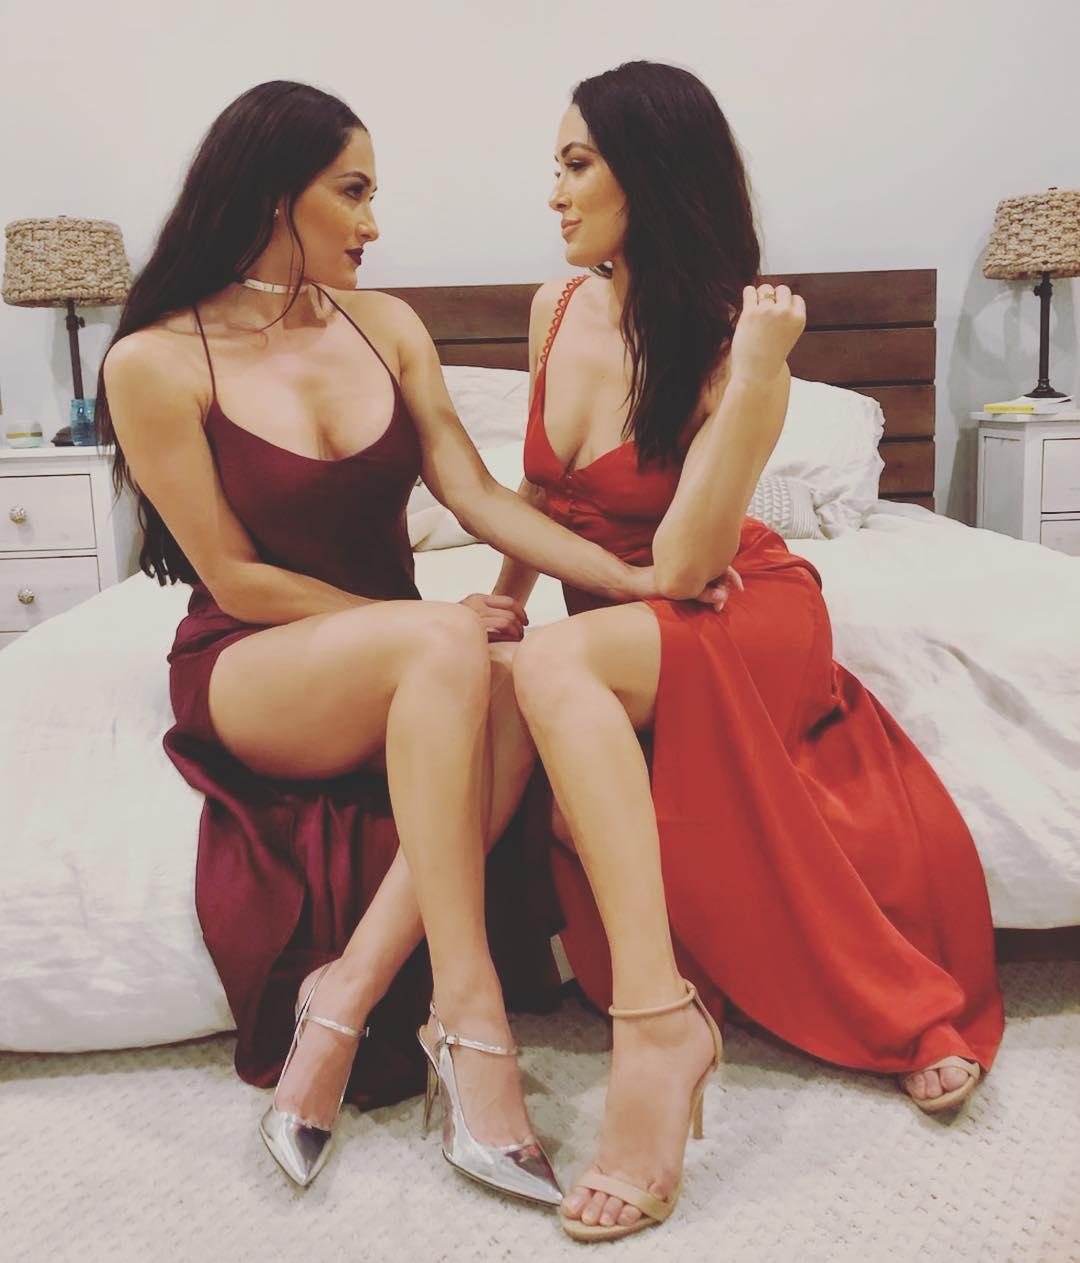 Happy Birthday to WWE and reality stars The Bella Twins who turn 36 today!  